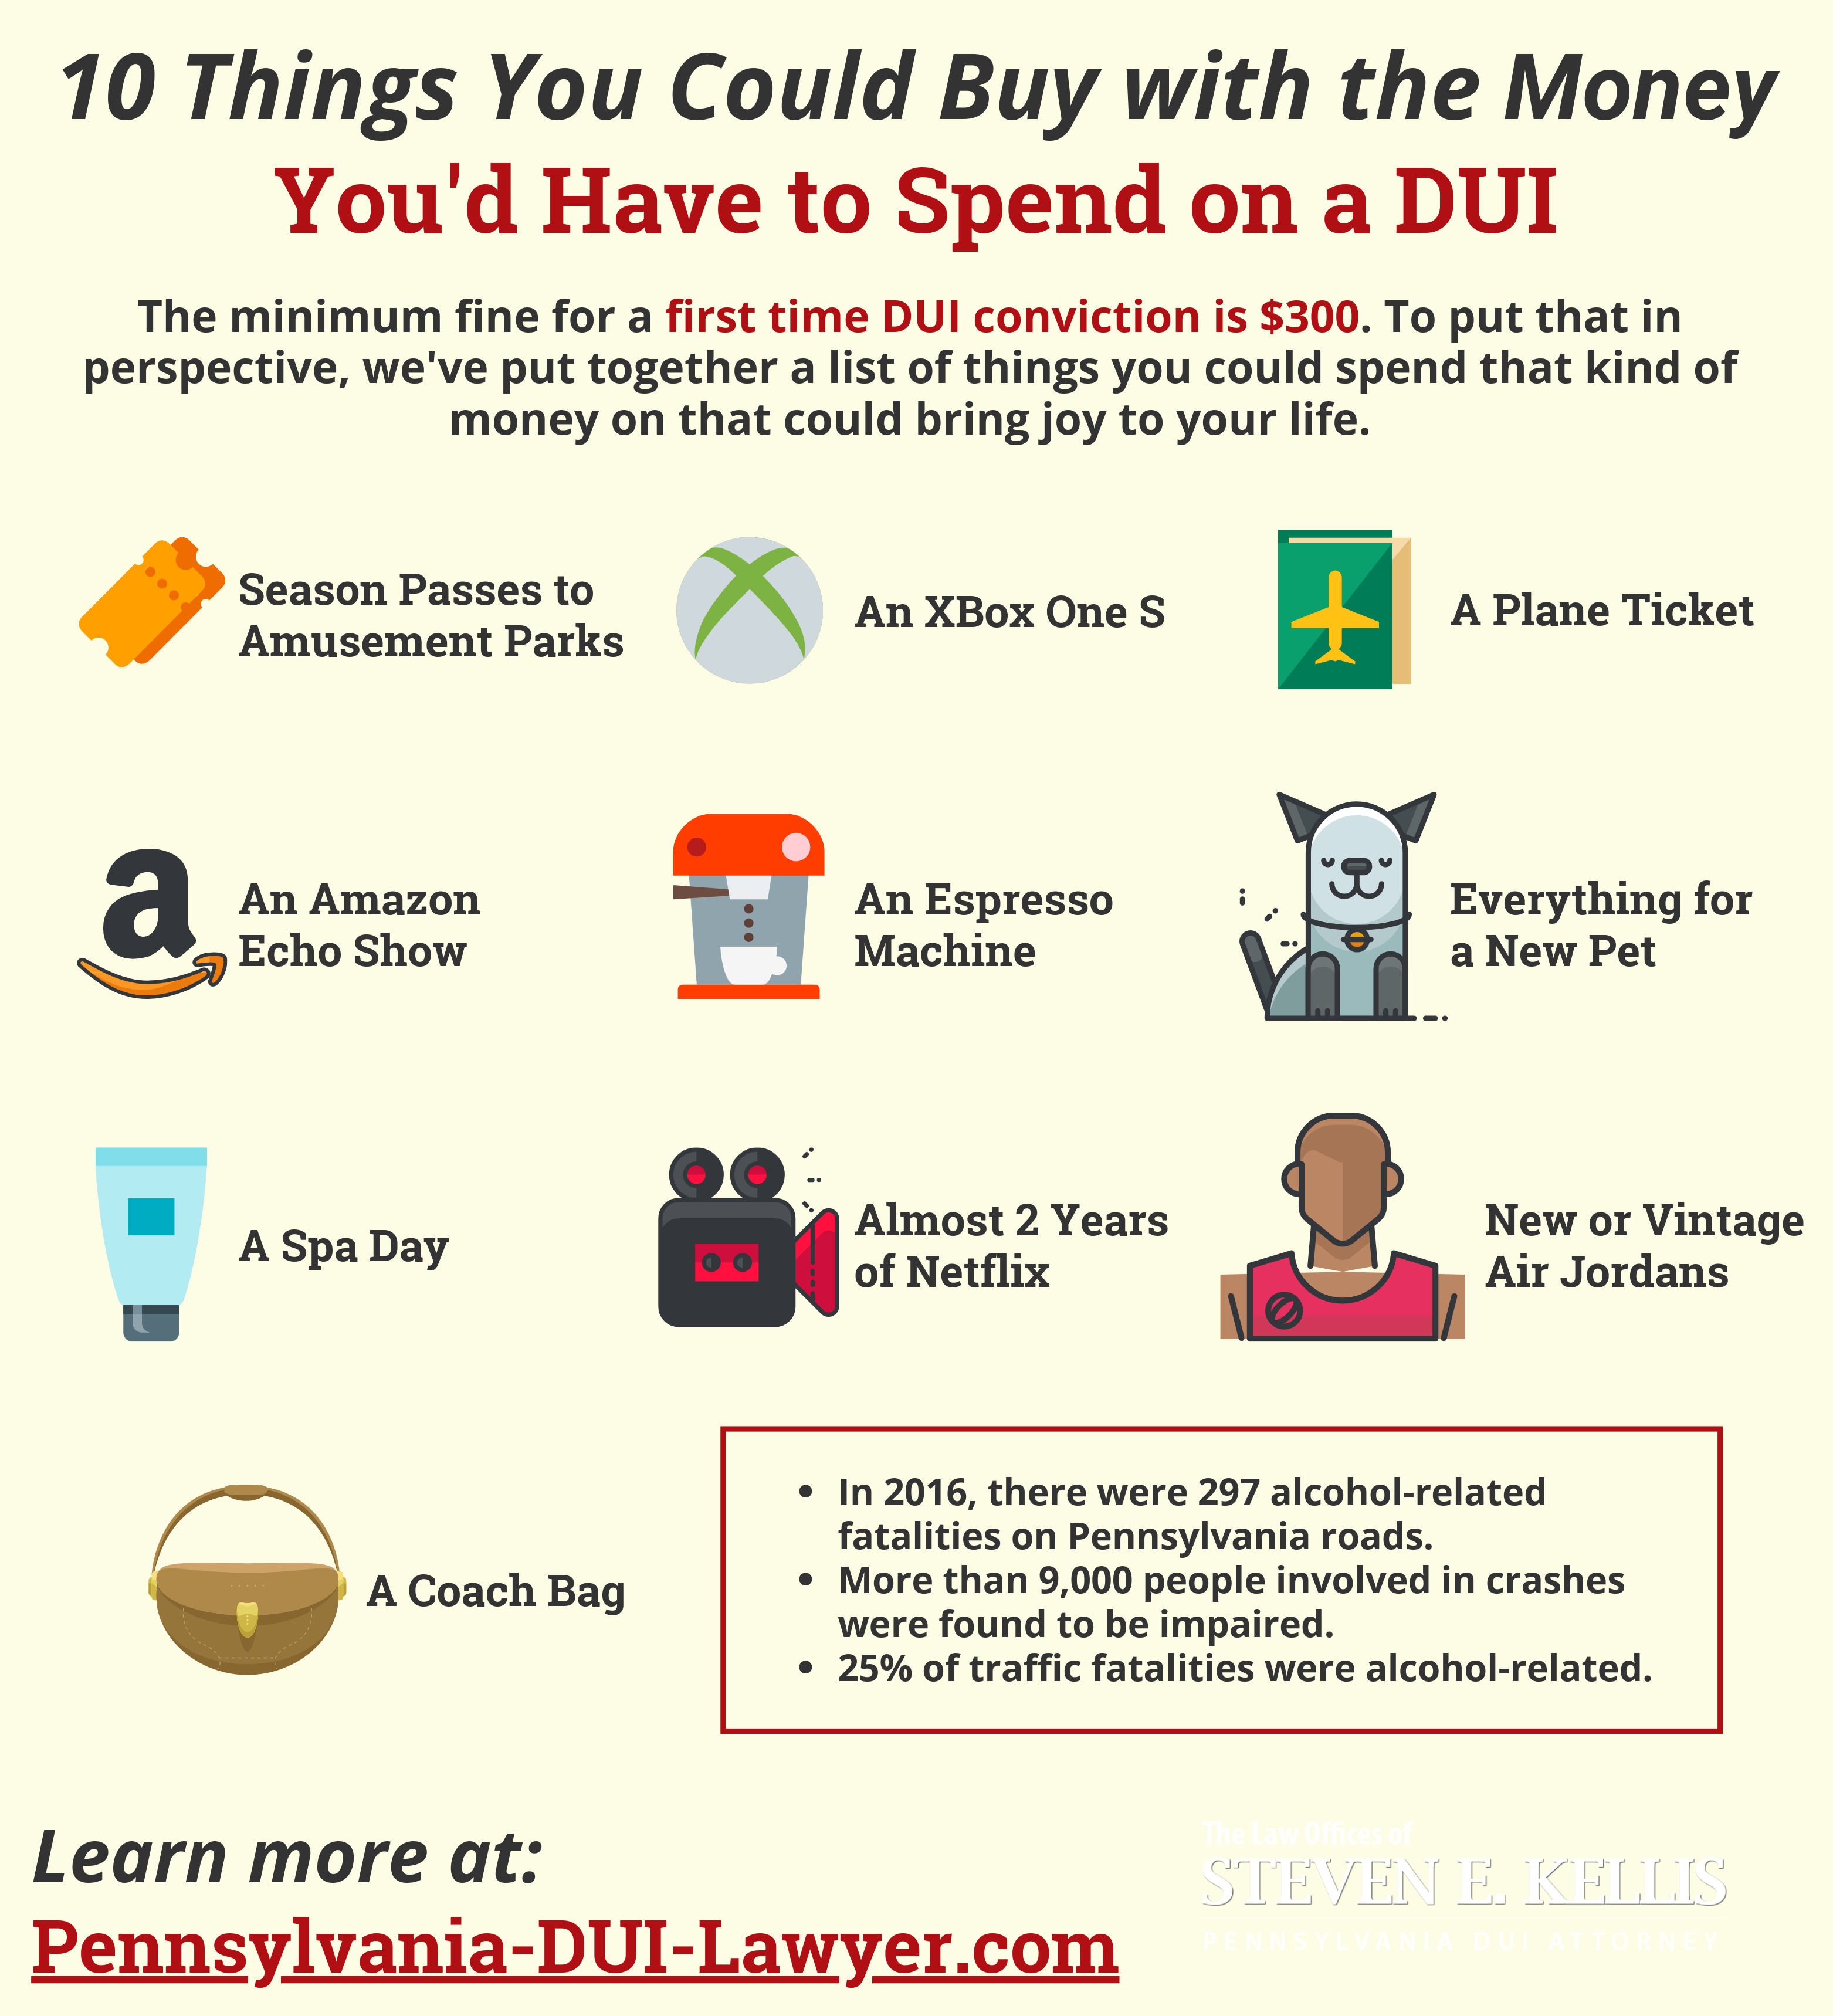 10 Things You Could Buy with the Money You'd Have to Spend on a DUI infographic